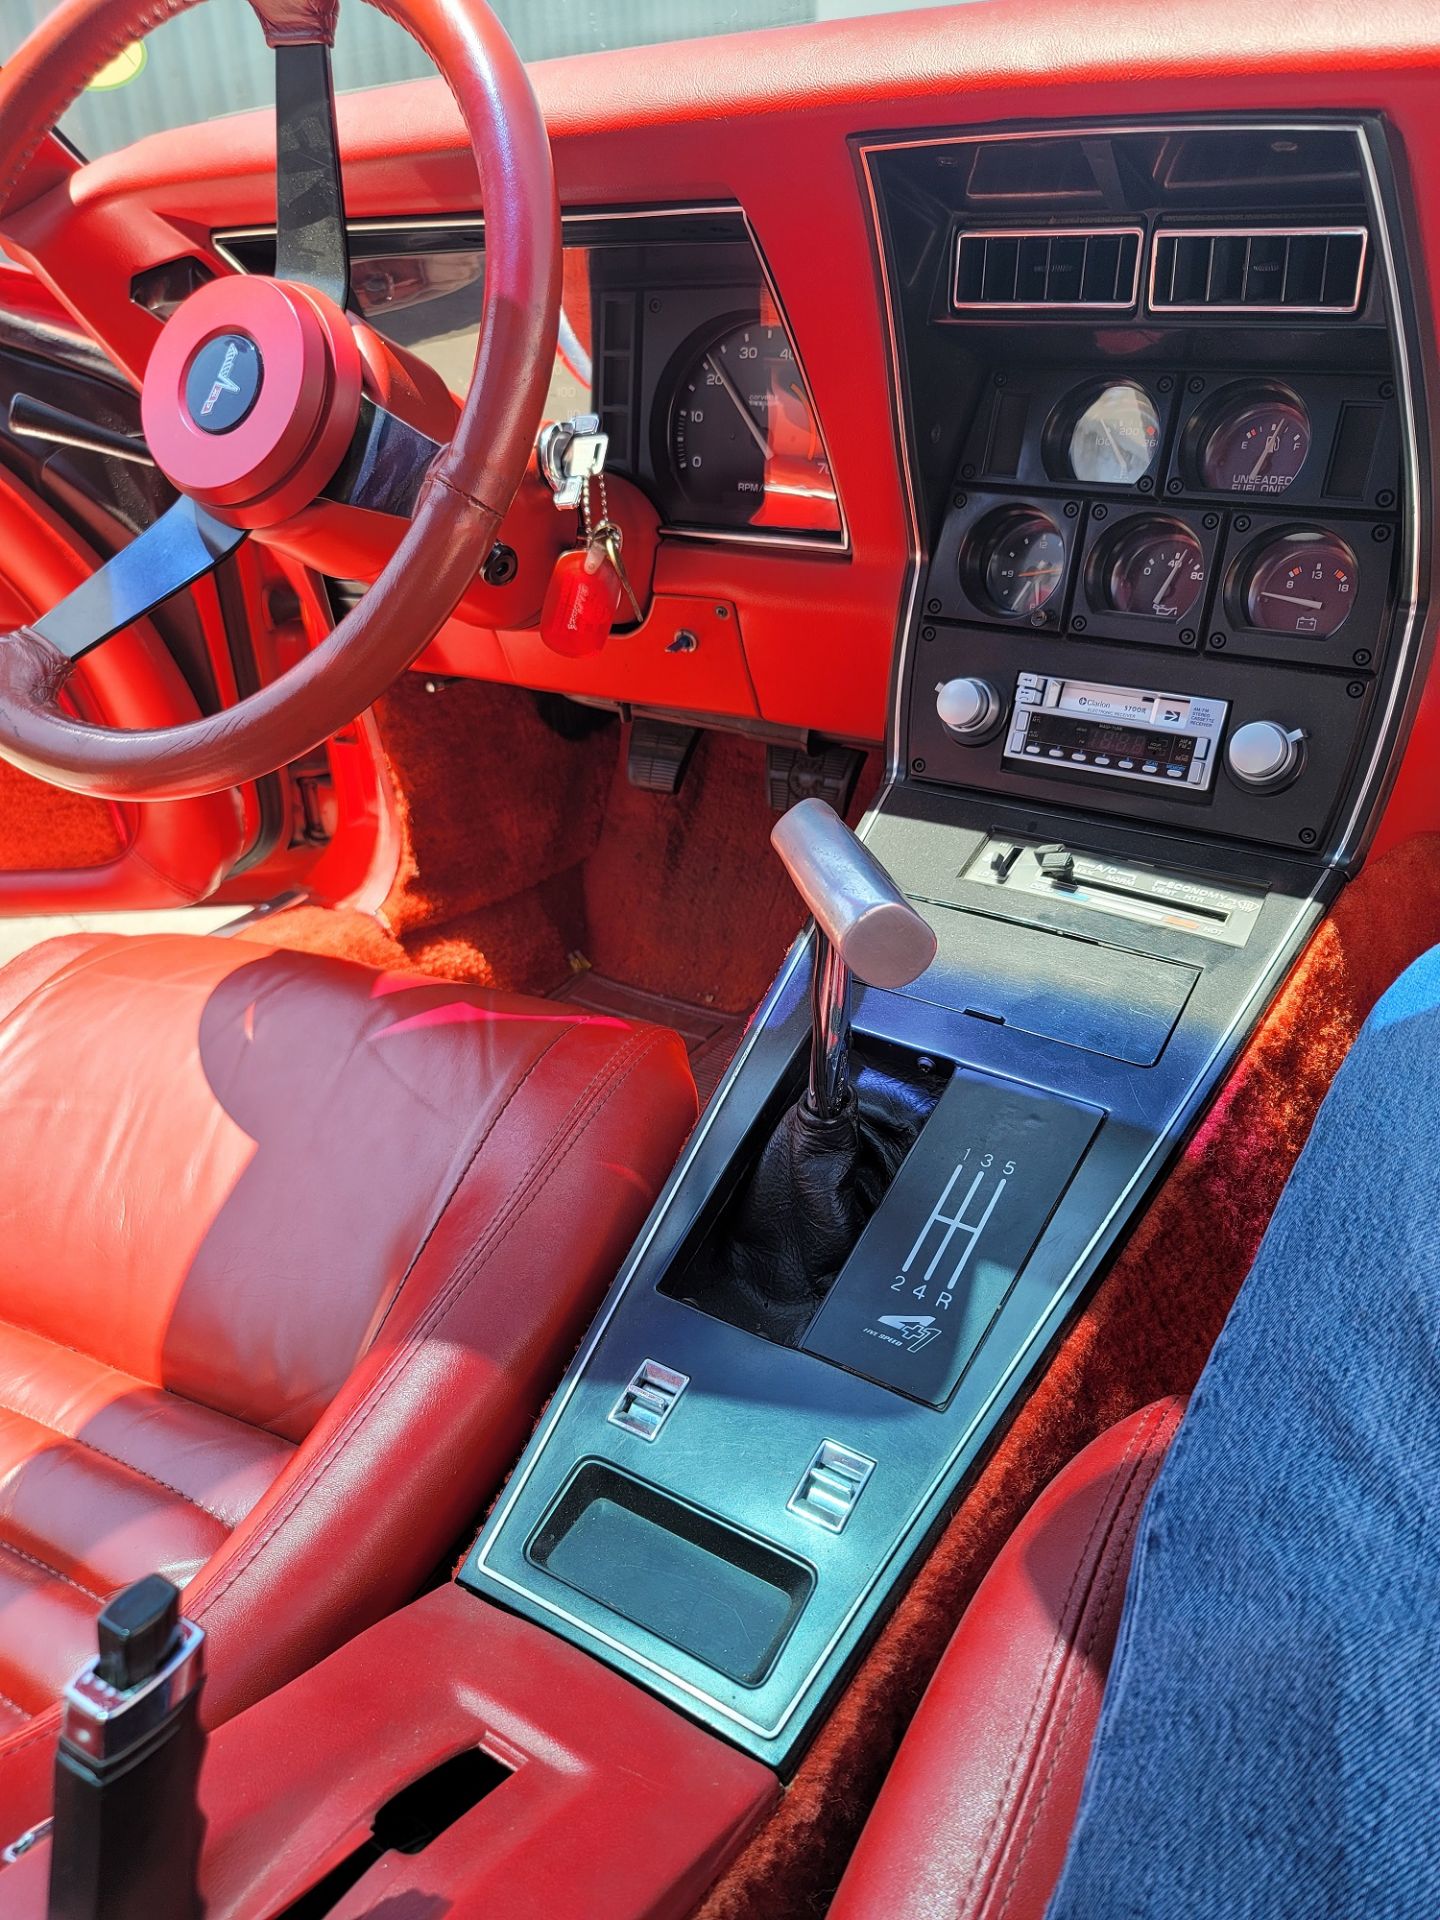 1980 CHEVROLET CORVETTE, WAS VIC EDELBROCK'S PERSONAL CAR BOUGHT FOR R&D, RED INTERIOR, TITLE ONLY. - Image 21 of 70